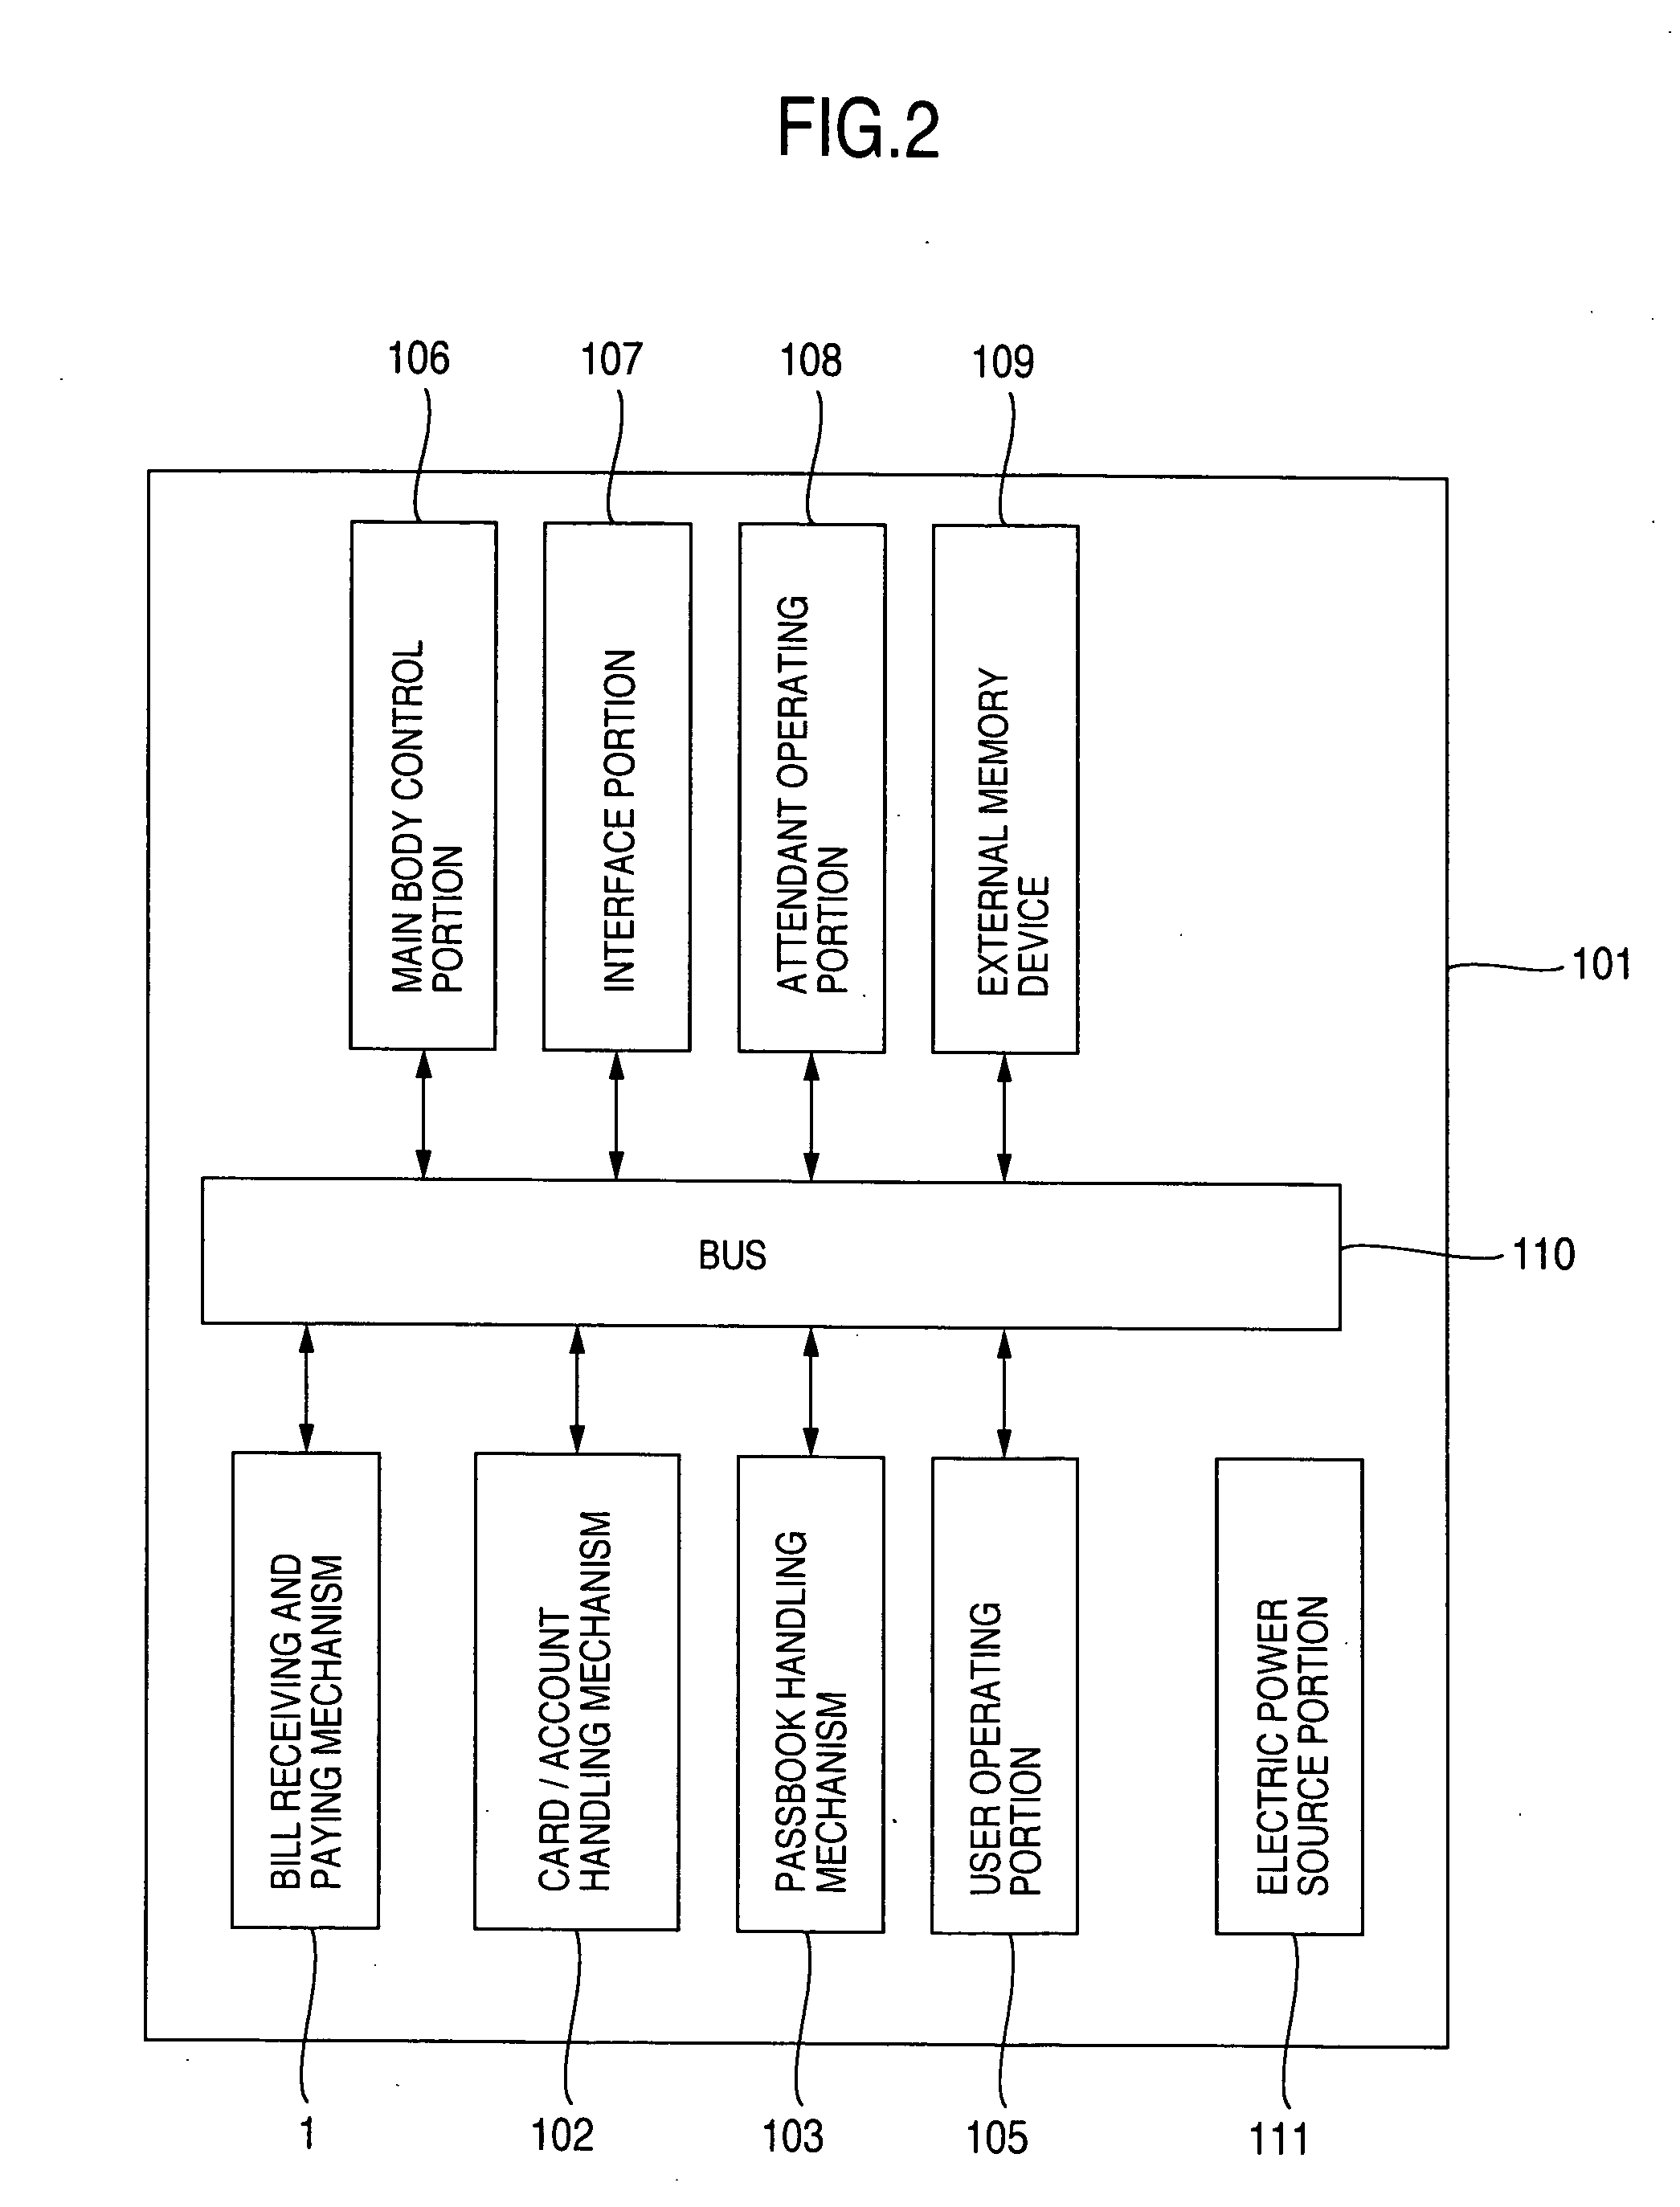 Bill receiving and paying apparatus